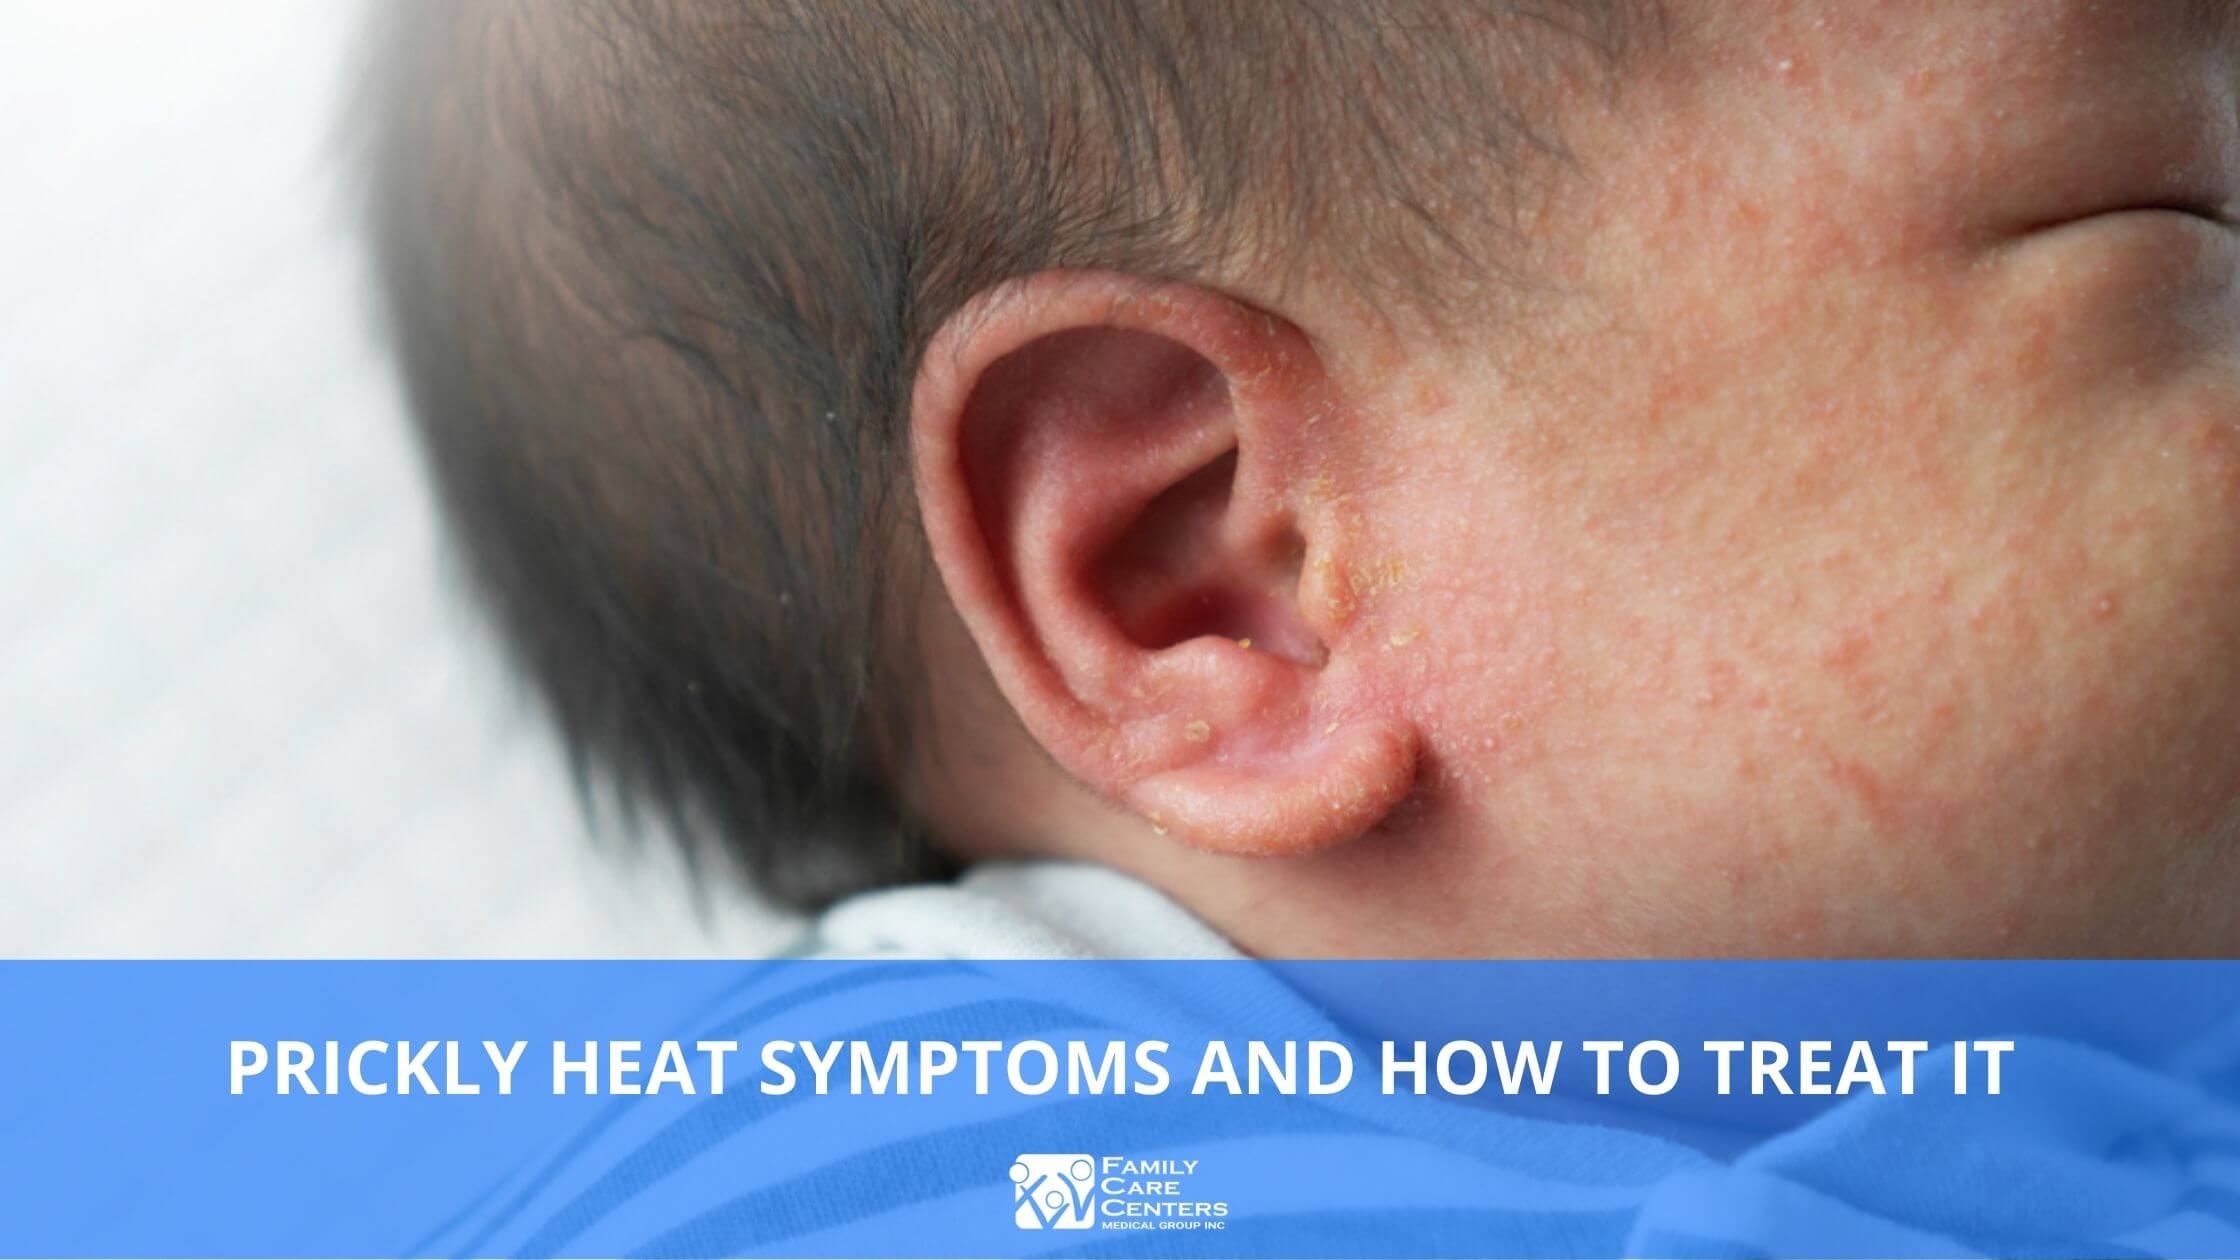 Prickly Heat Symptoms and How to Treat It